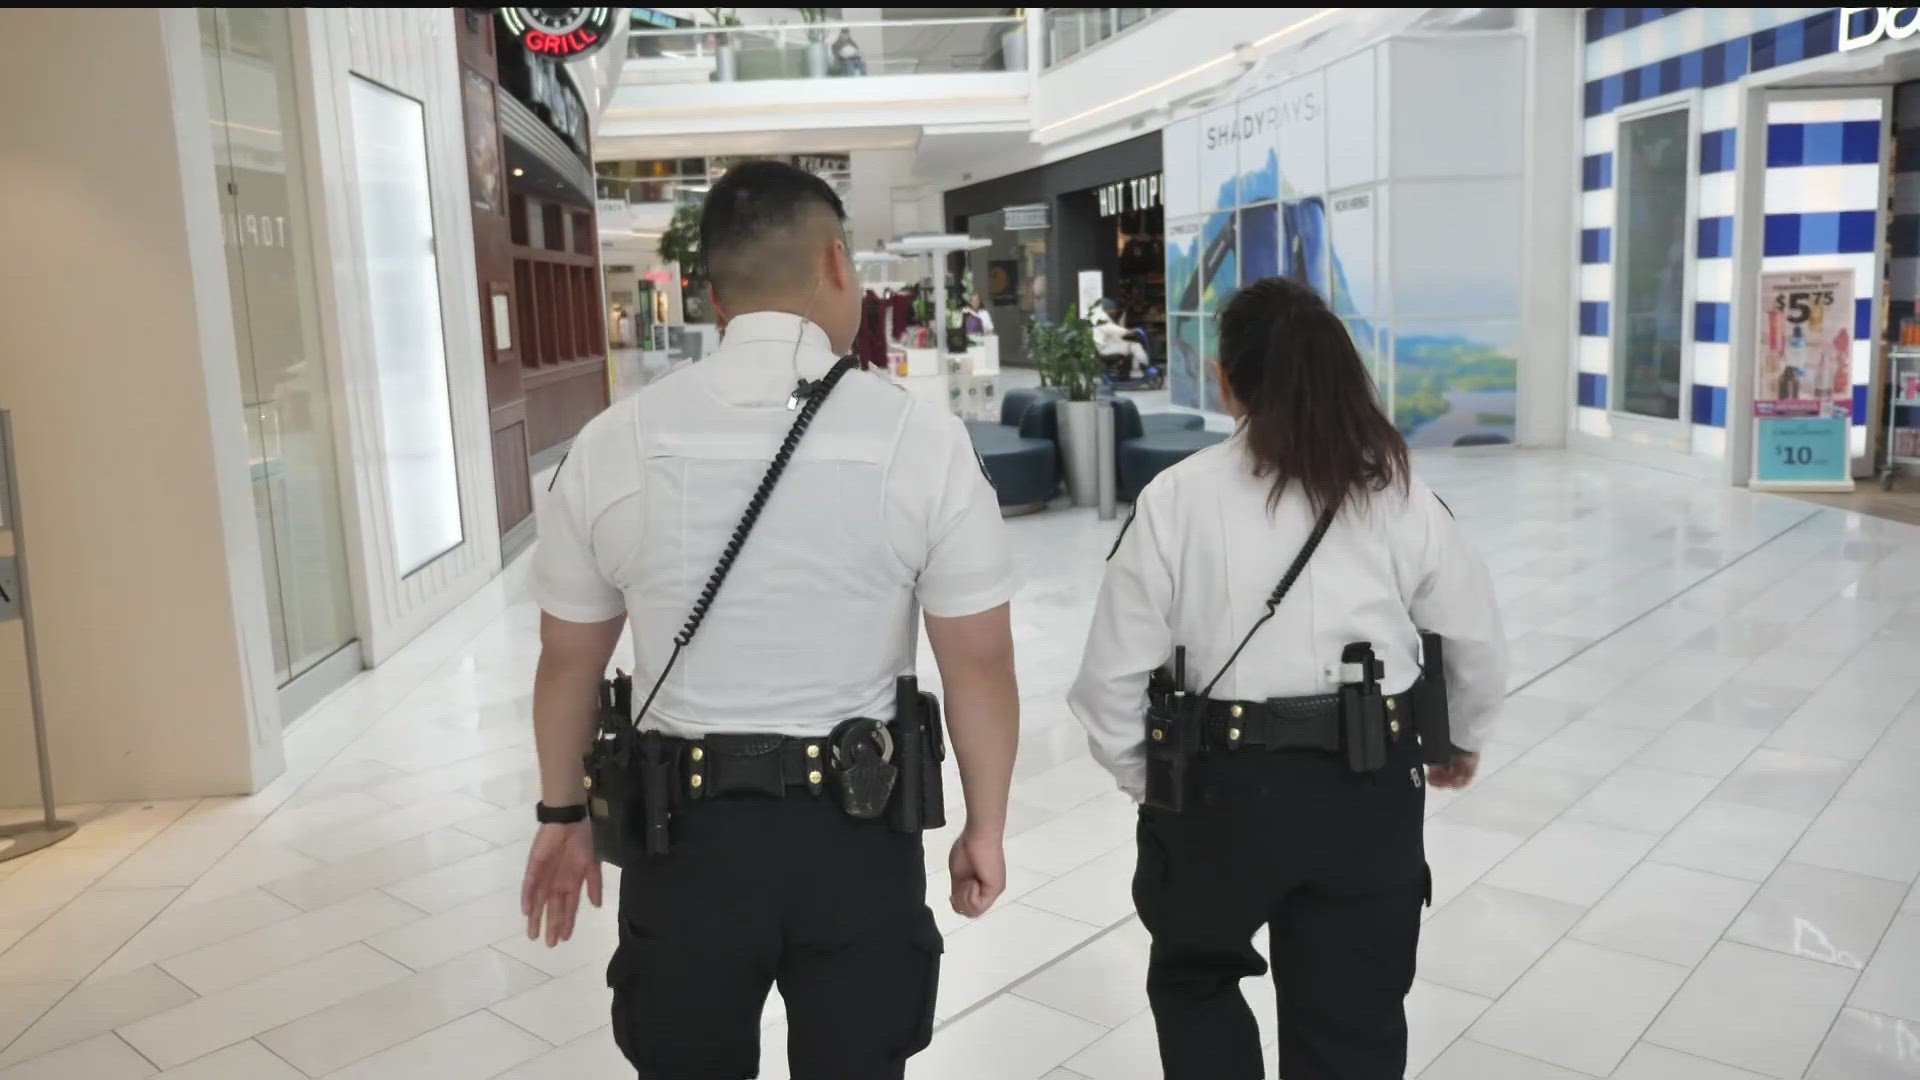 From bike patrol to a dispatch center, the Mall of America security team is extensive.